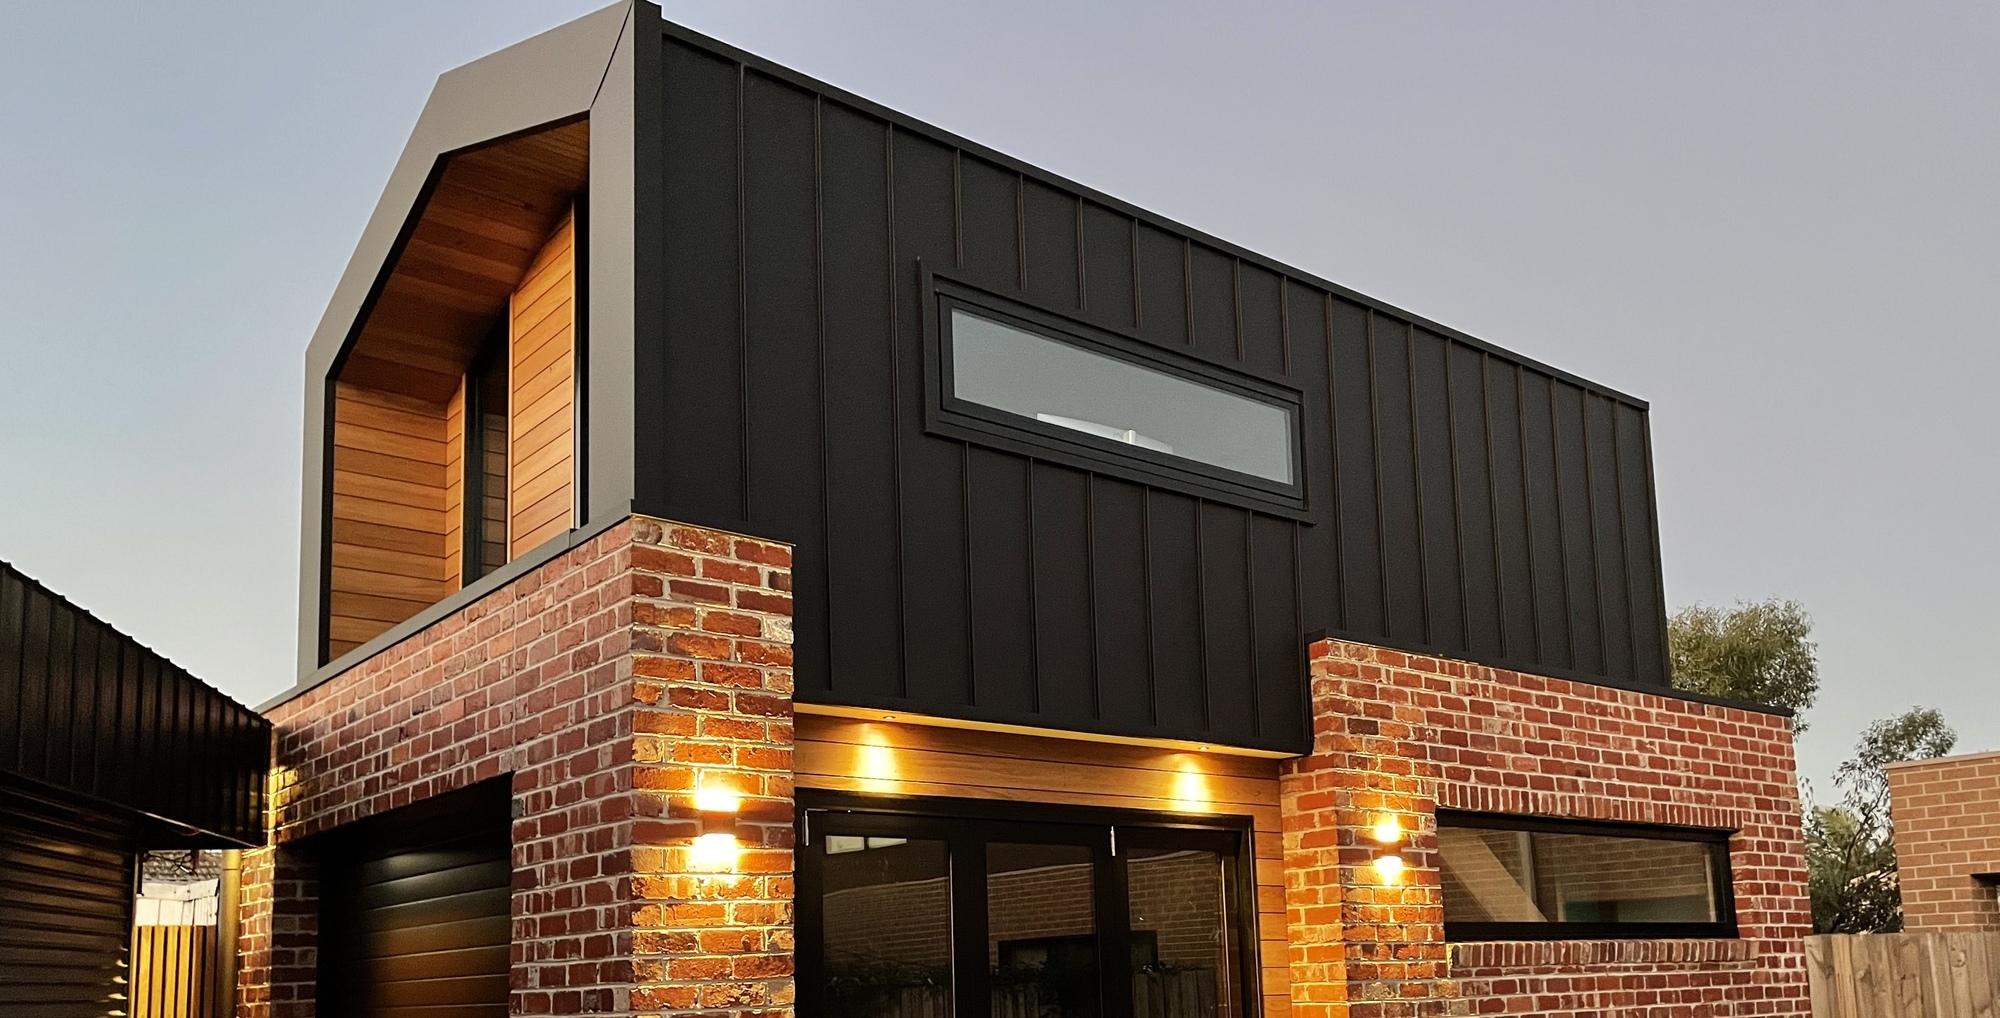 Mark from West Footscray, VIC loves COLORBOND® steel. Roofing, Guttering & Fascia, Walling made from COLORBOND® steel in the colour Monument® Matt Finish